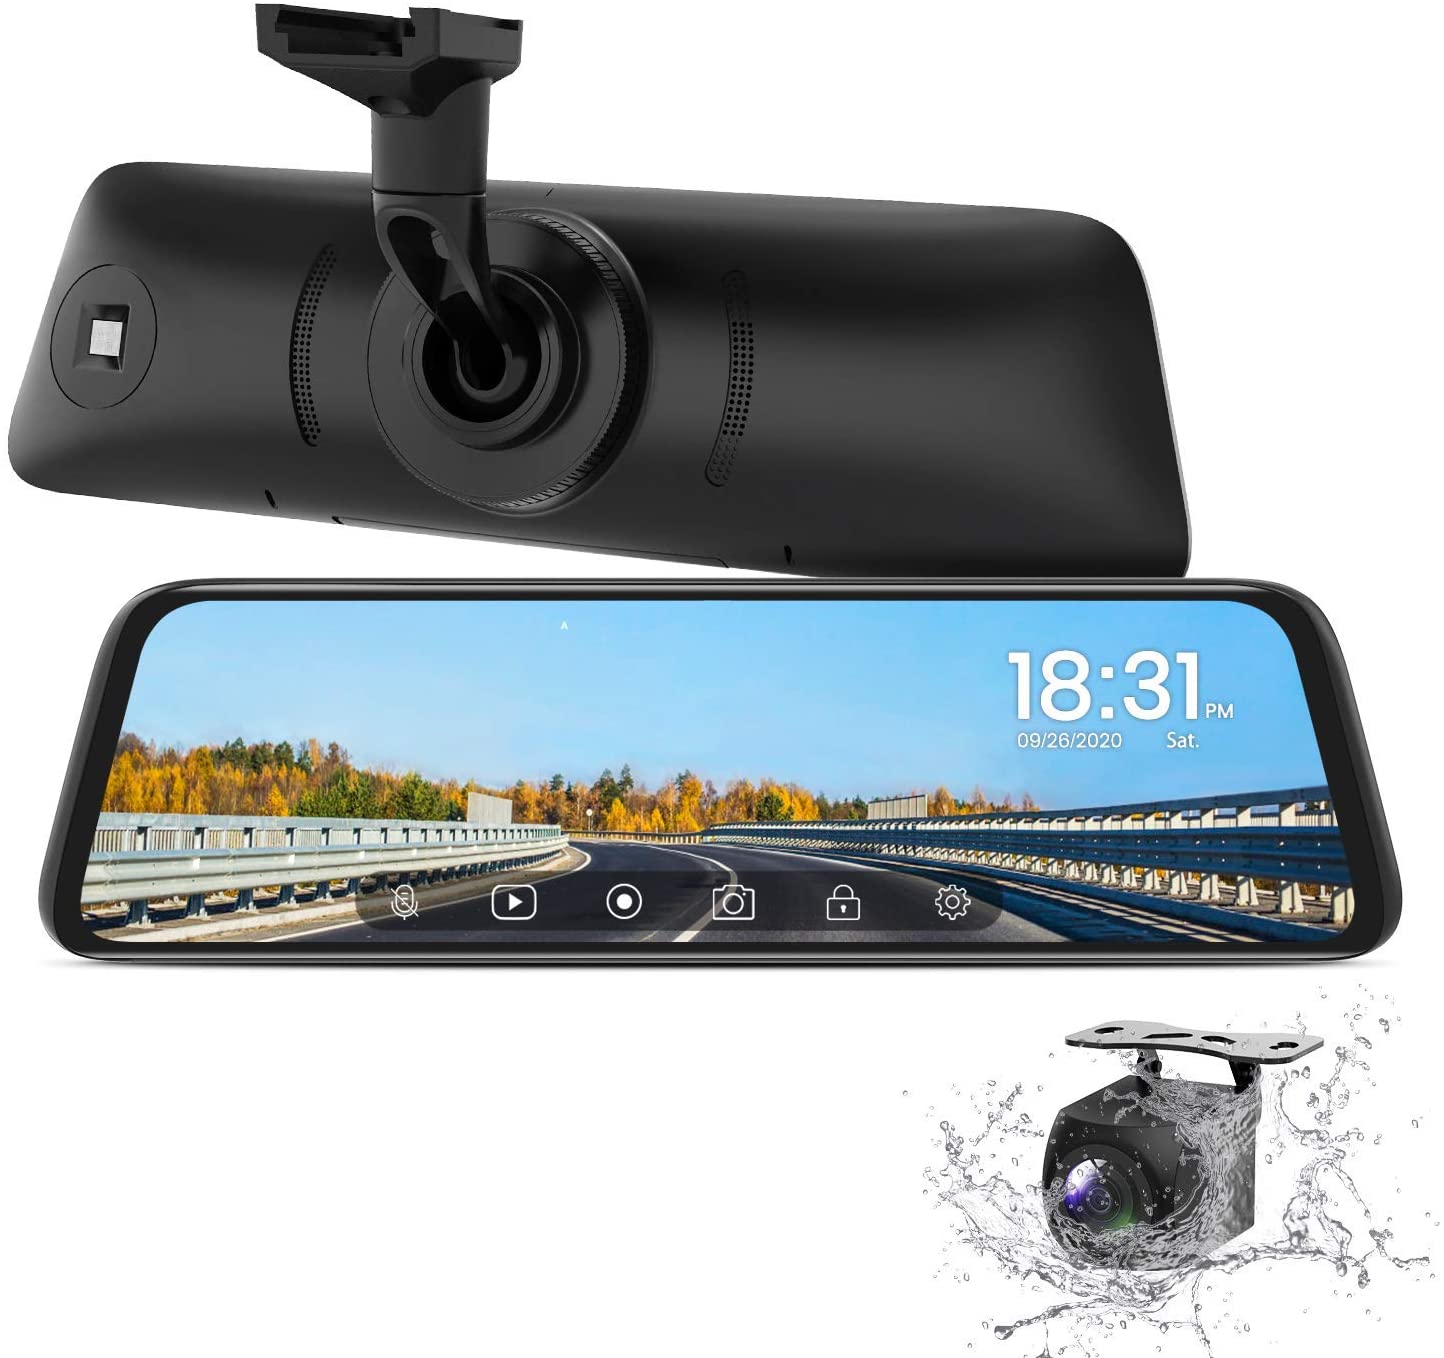 AUTO-VOX T2 Backup Camera for Car/Trucks, OEM Look Rear View